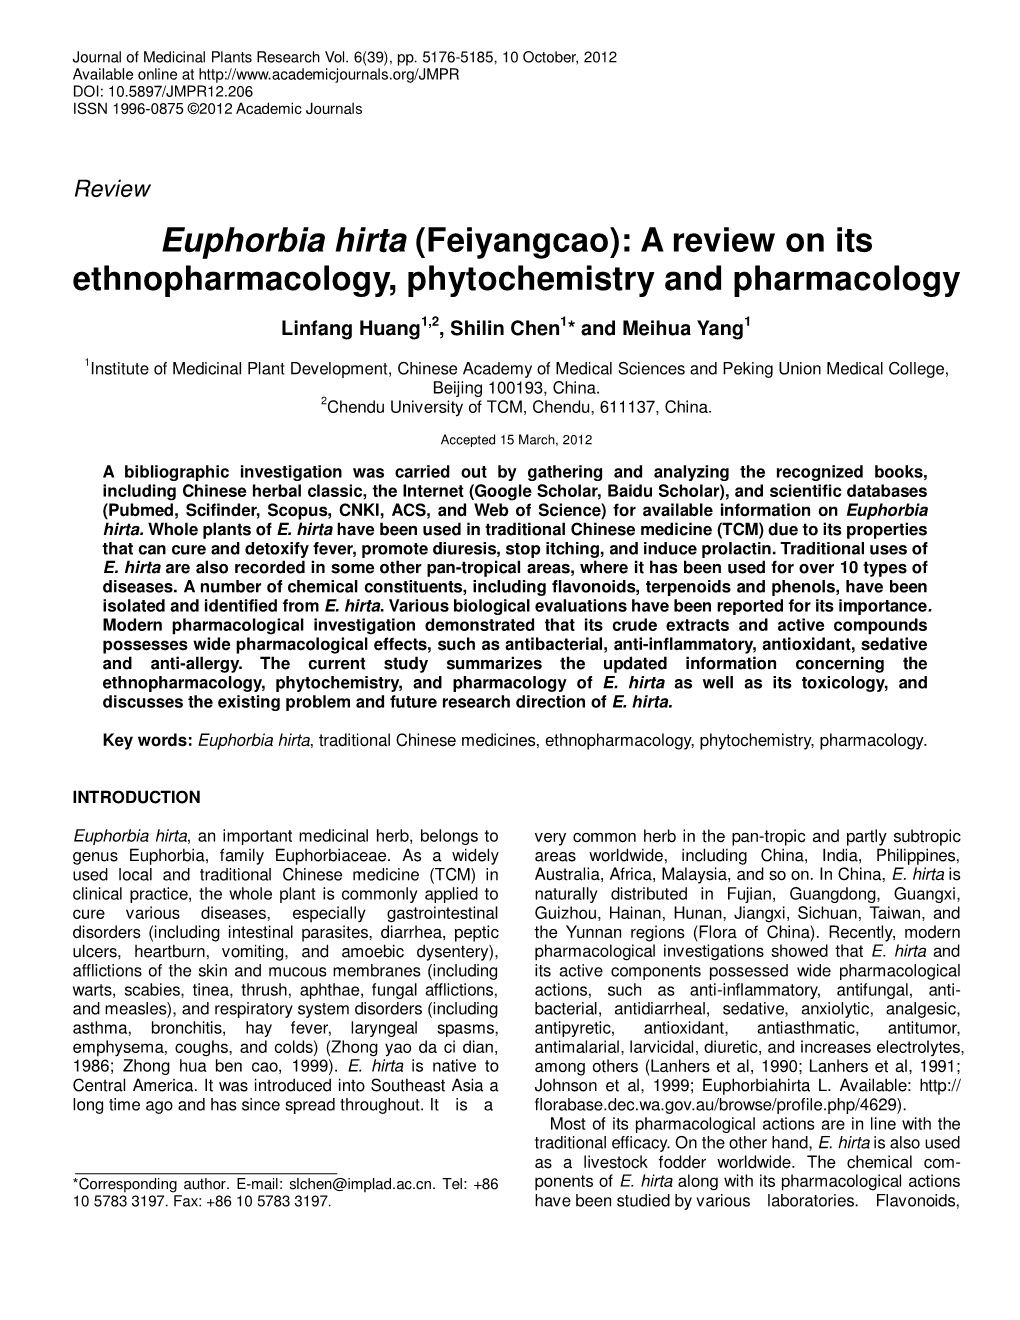 Euphorbia Hirta (Feiyangcao): a Review on Its Ethnopharmacology, Phytochemistry and Pharmacology